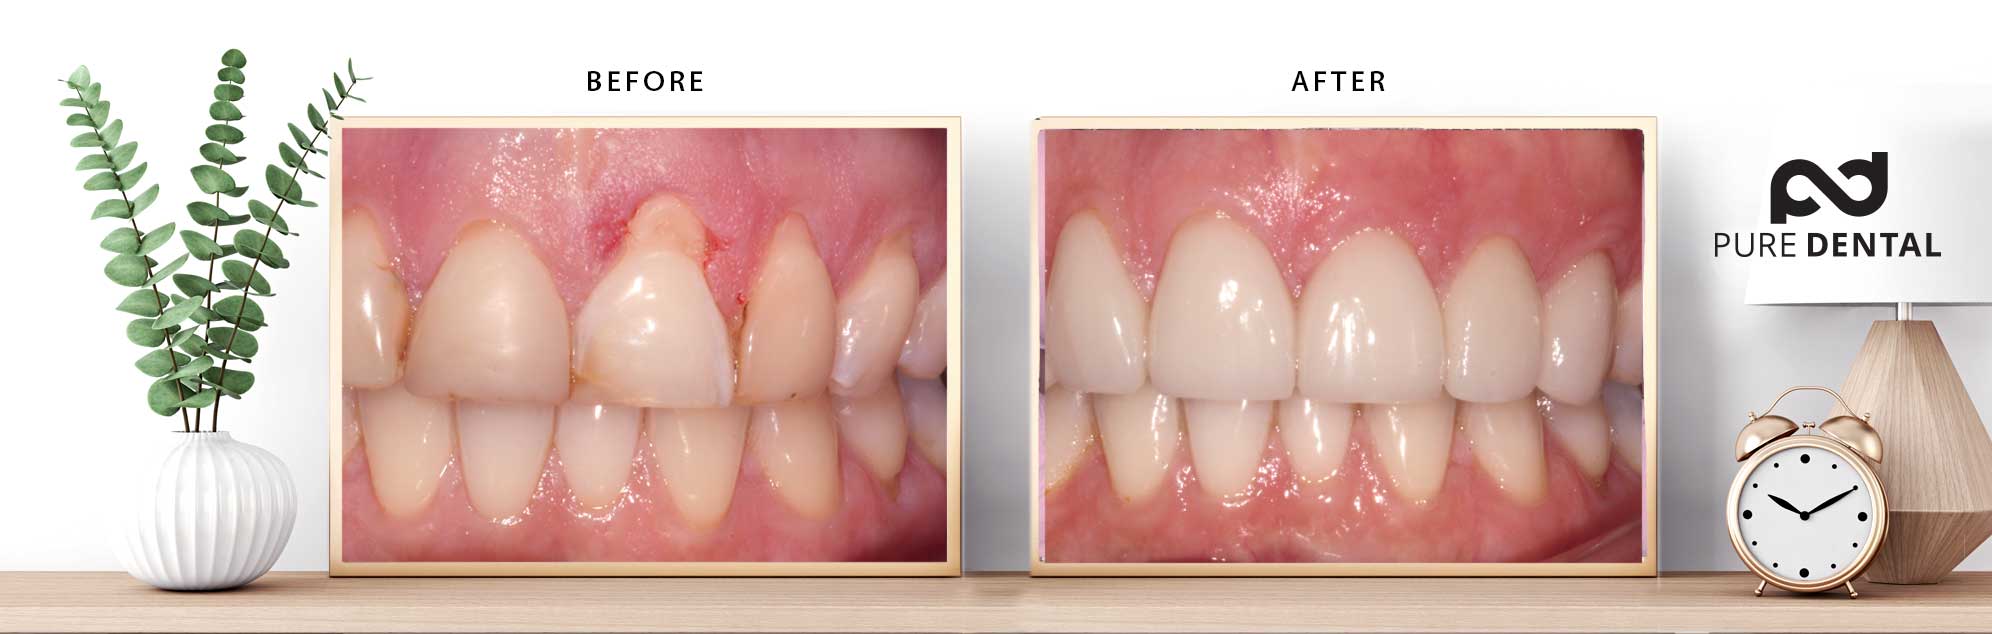 How Pure Dental fixes receding gums without surgery